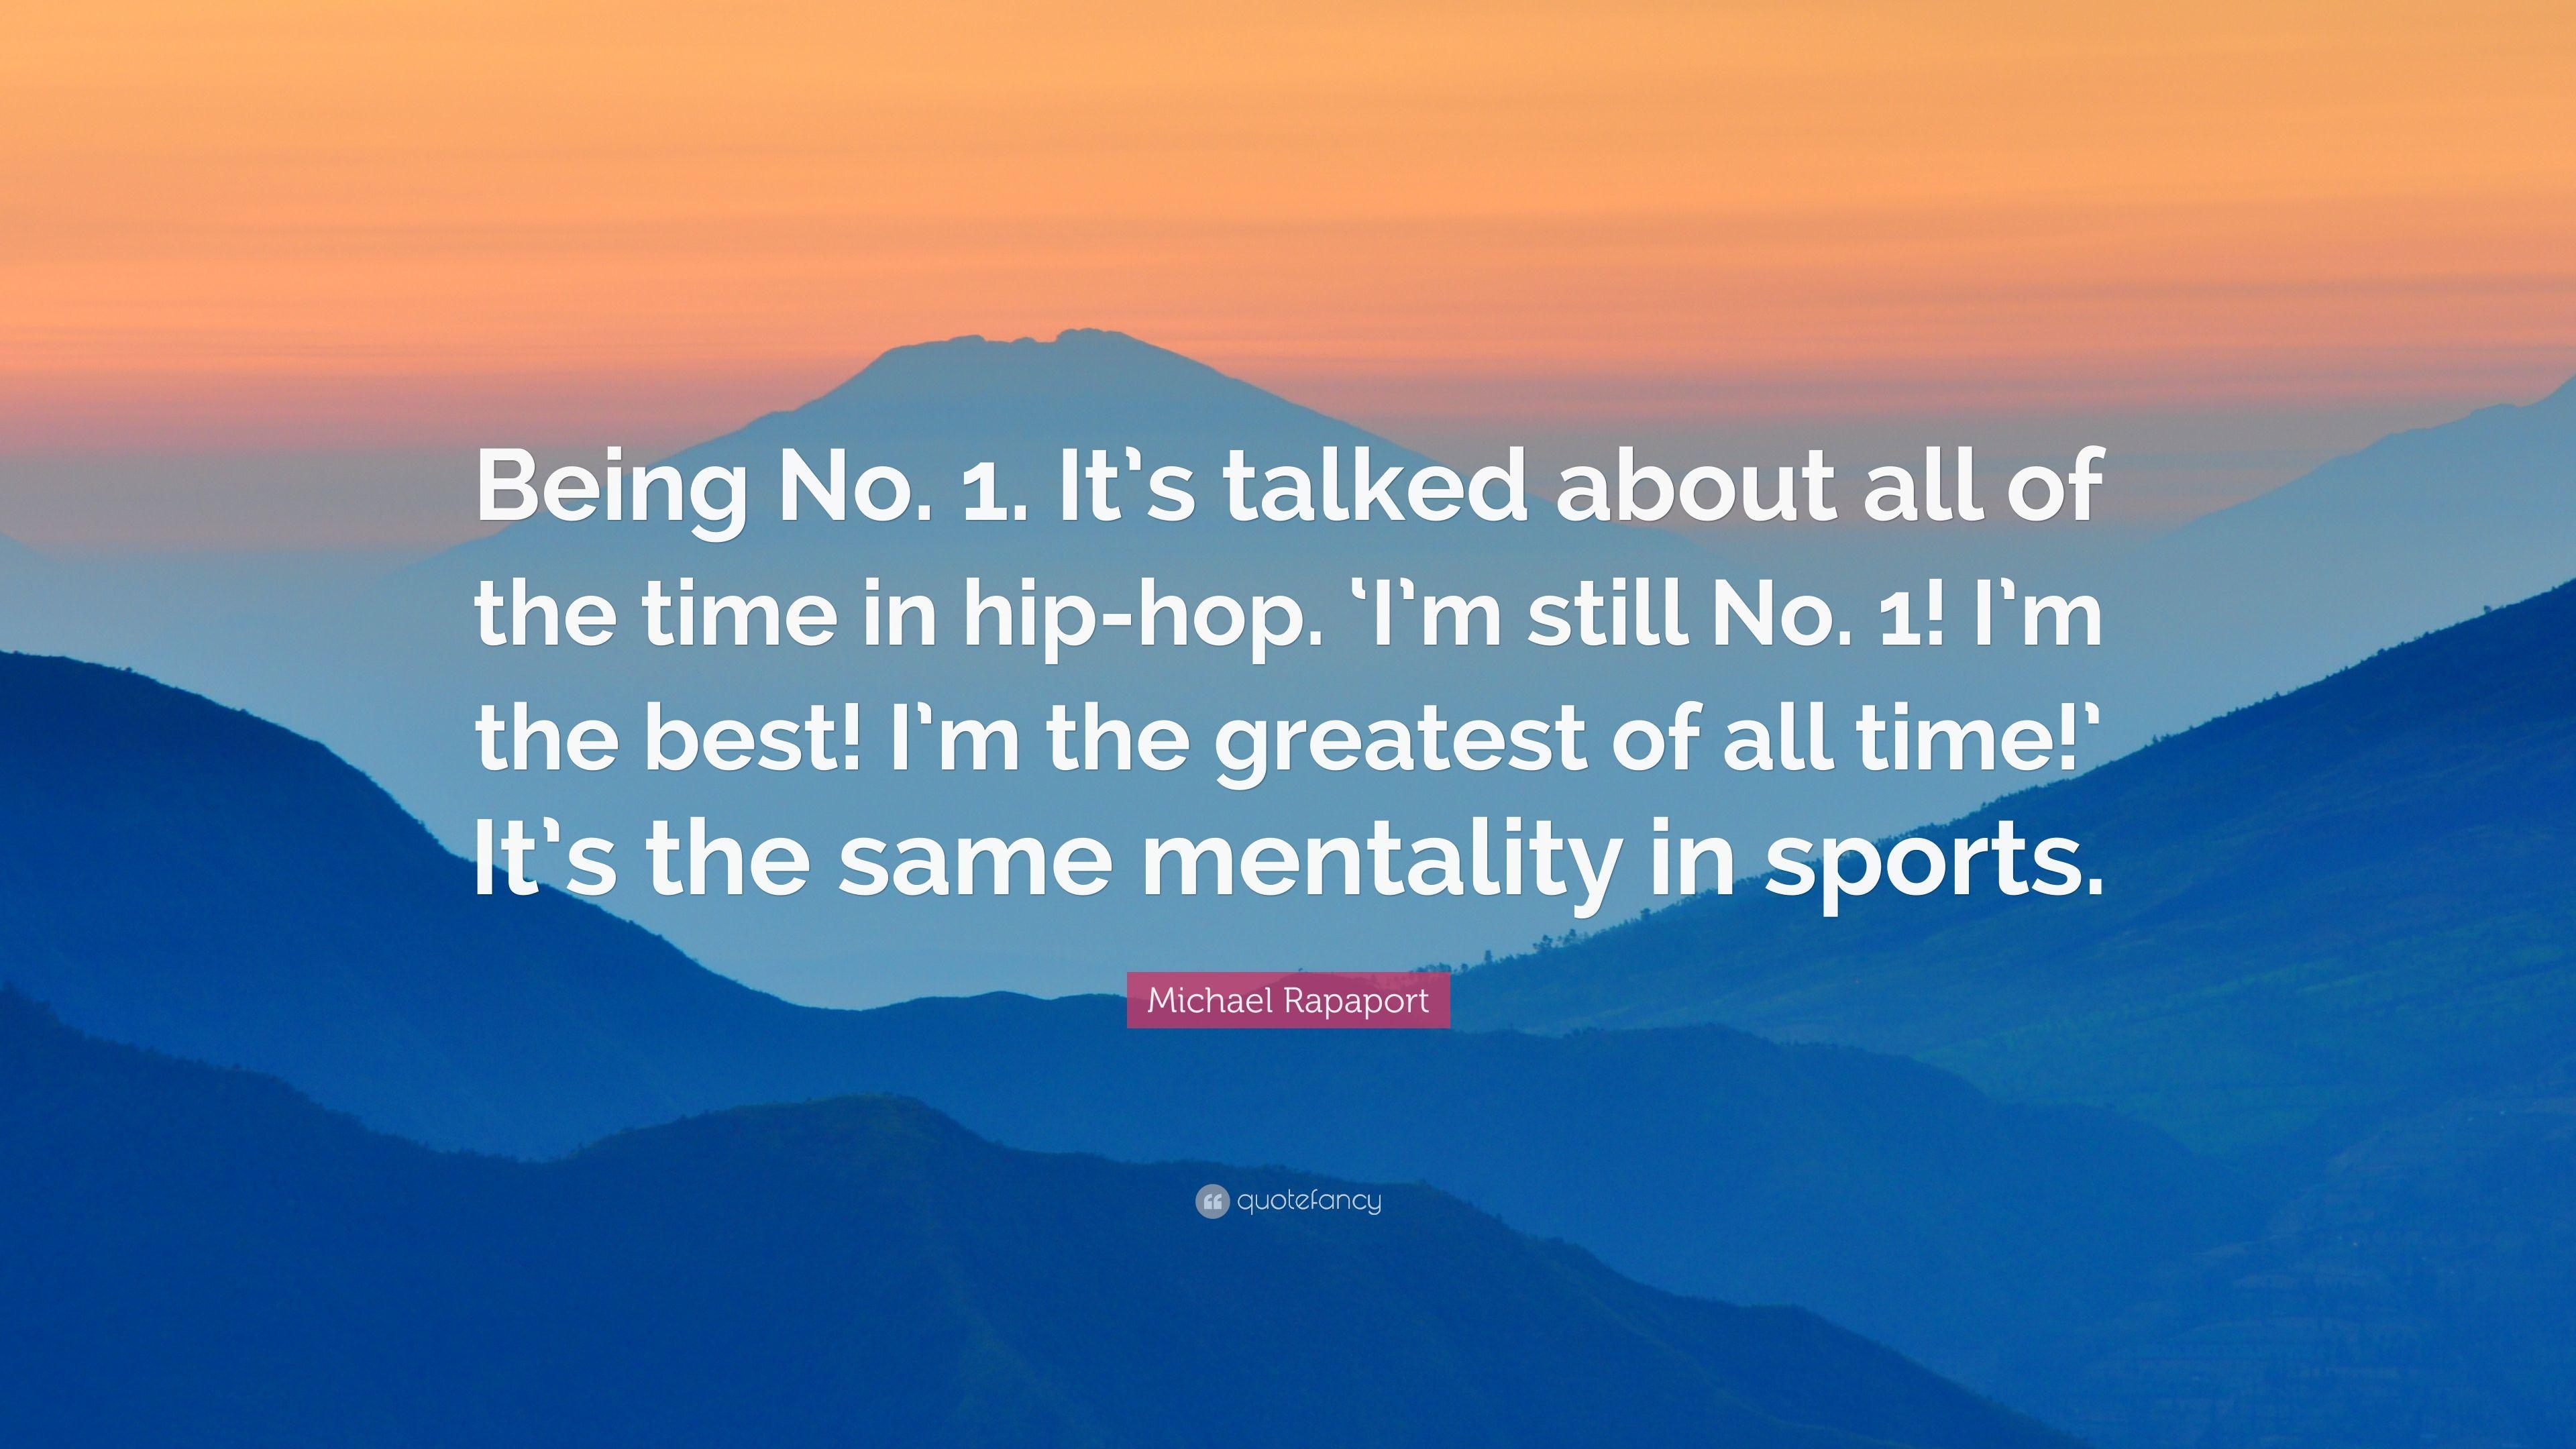 Michael Rapaport Quote: “Being No. 1. It's talked about all